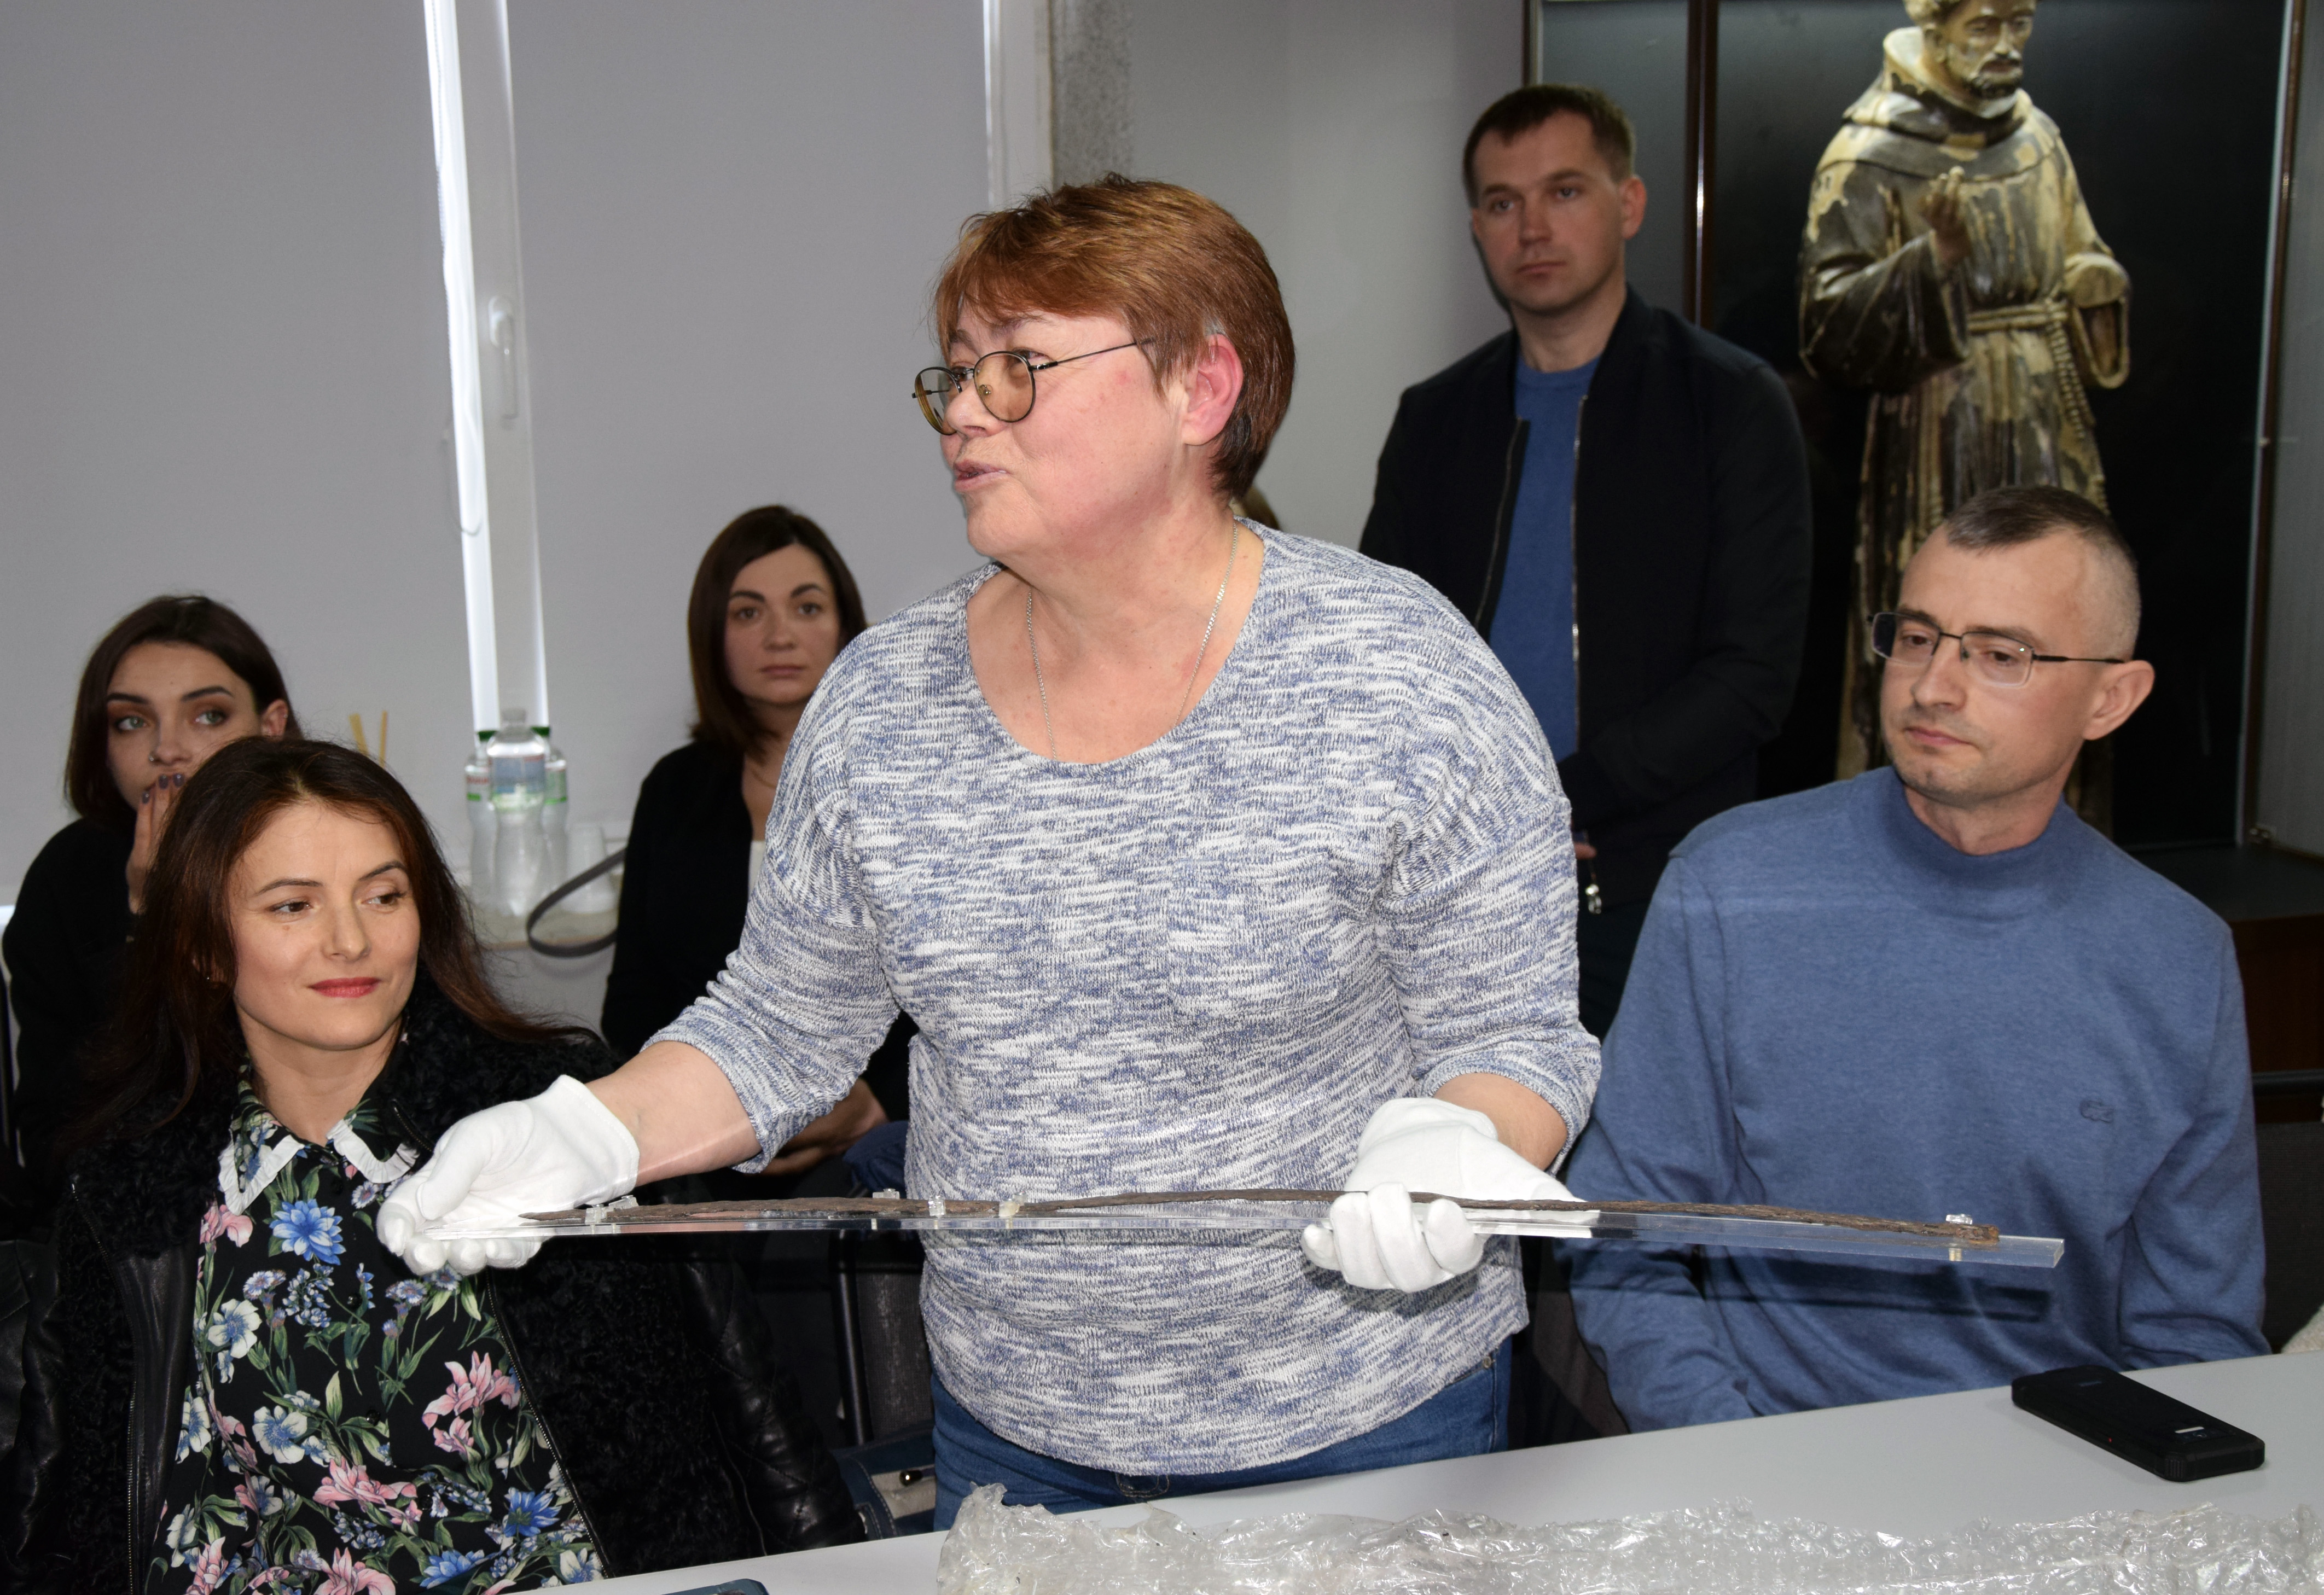 Director of the Ternopil Regional Center for the Protection and Scientific Research of Cultural Heritage Monuments, Maryna Yagodynska, presents an iron sword of the 13th-14th centuries to the Zalozetsky Museum of Local Lore